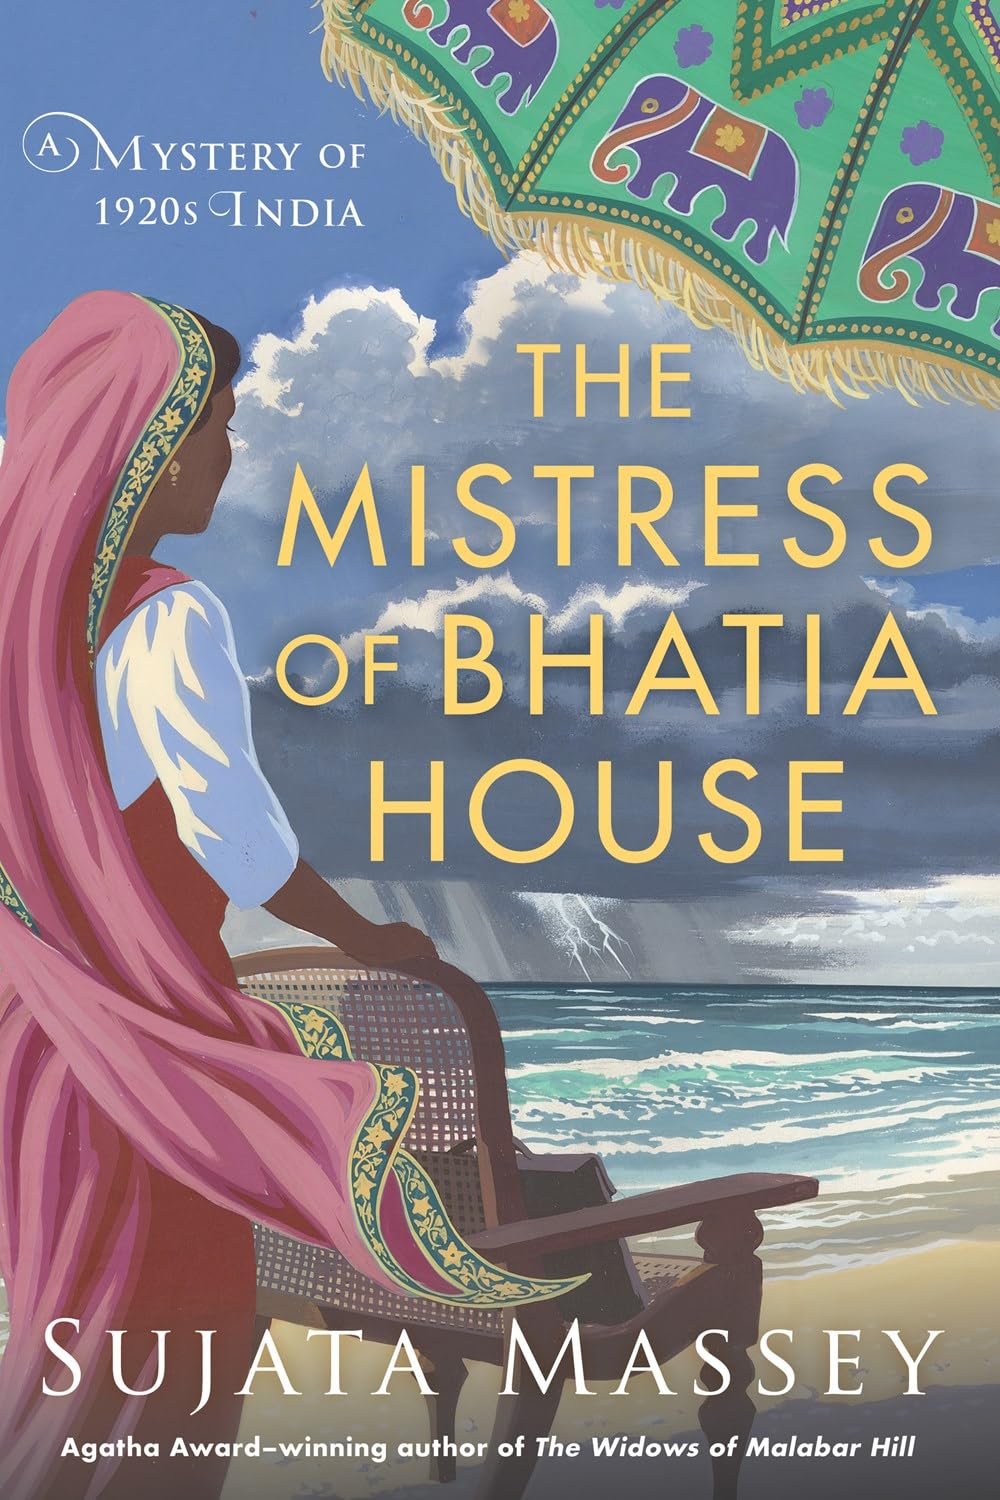 One of our recommended books is The Mistress of Bhatia House by Sujata Massey